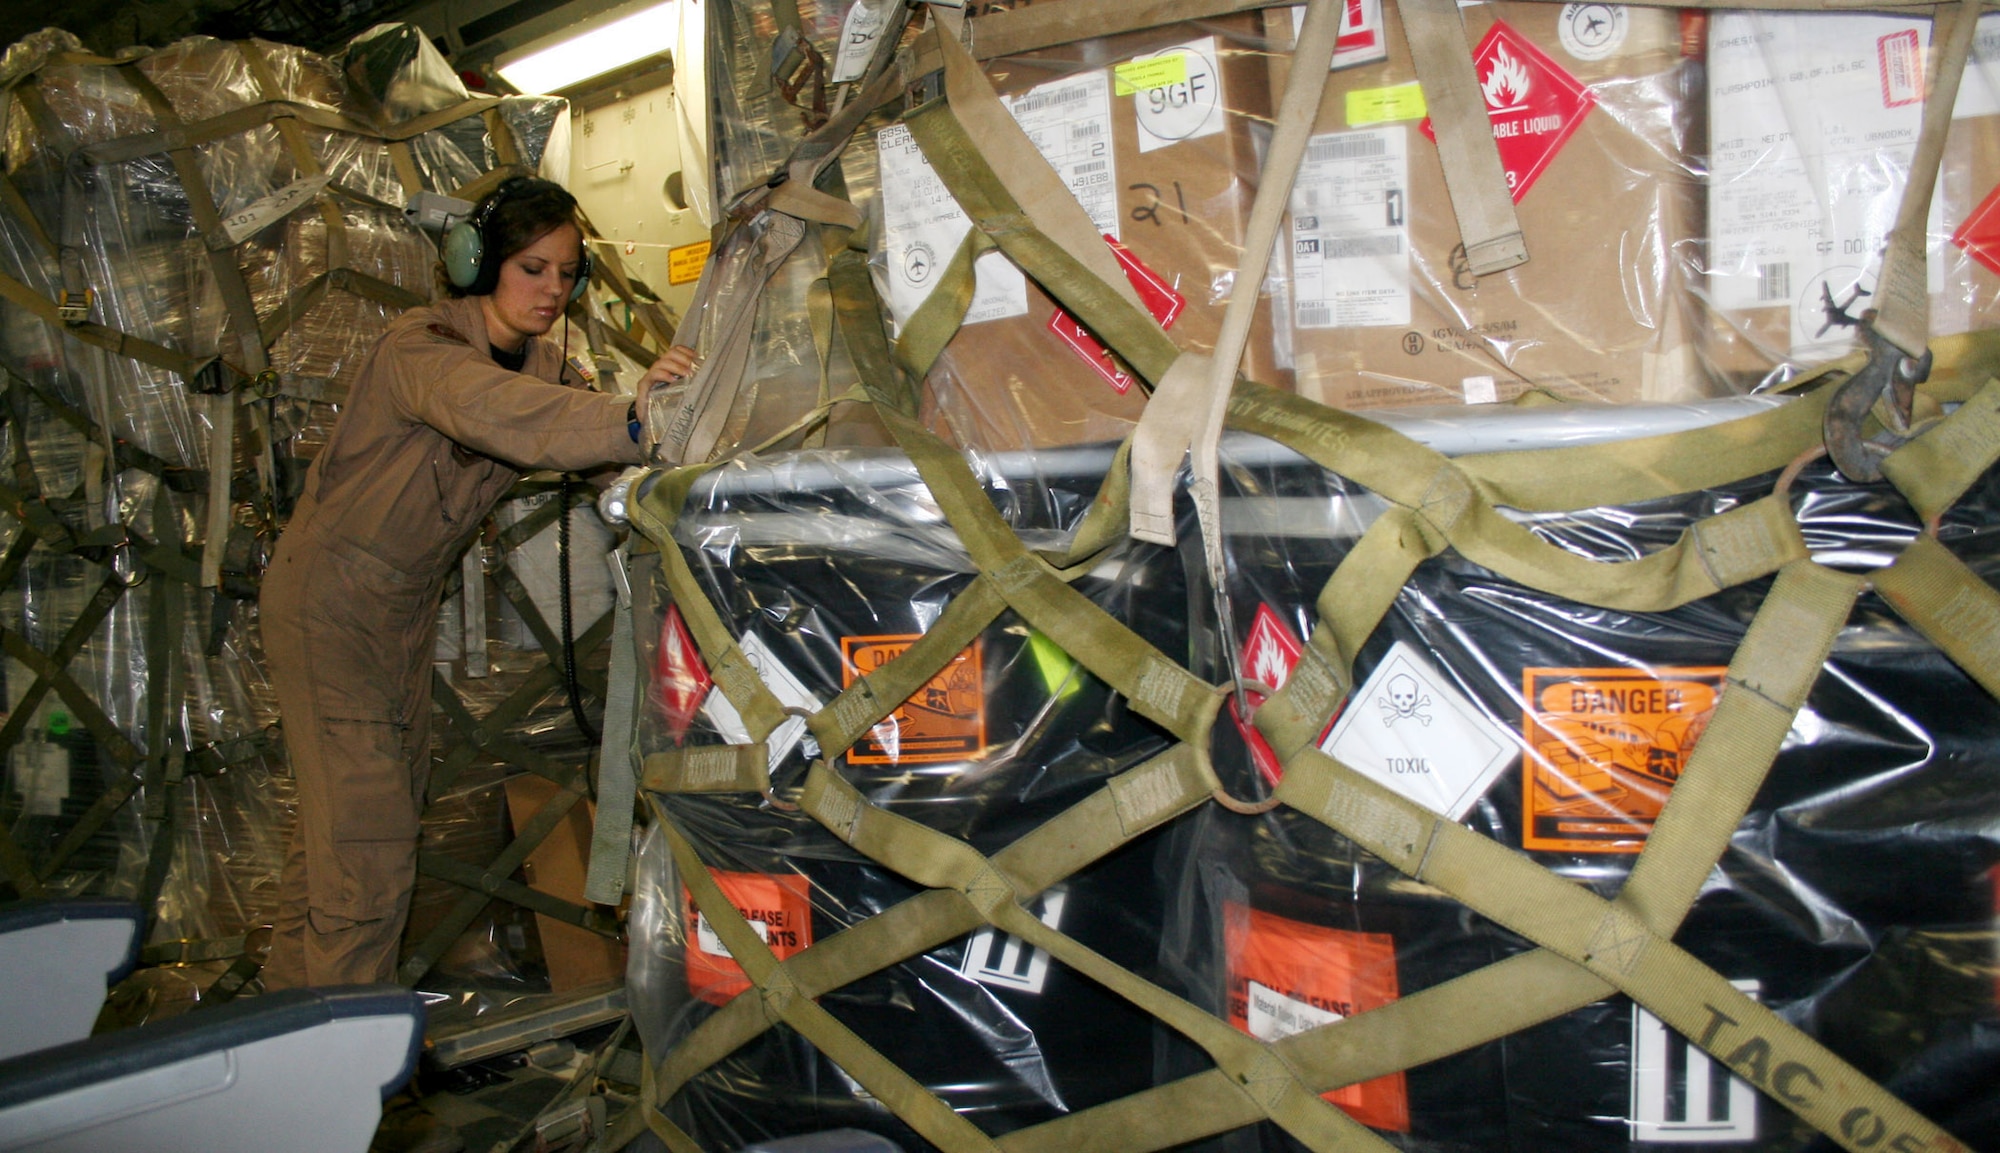 Airman 1st Class Suzanne Van Elk gets a pallet rolling for download from a C-17 Globemaster III at Manas Air Base, Kyrgyzstan. When cargo includes hazardous material, like the volatile methanol on this pallet, loadmasters plan the cargo load around it, keeping incompatible cargo away. Airman Van Elk is deployed from McChord Air Force Base, Wash. (U.S. Air Force photo)